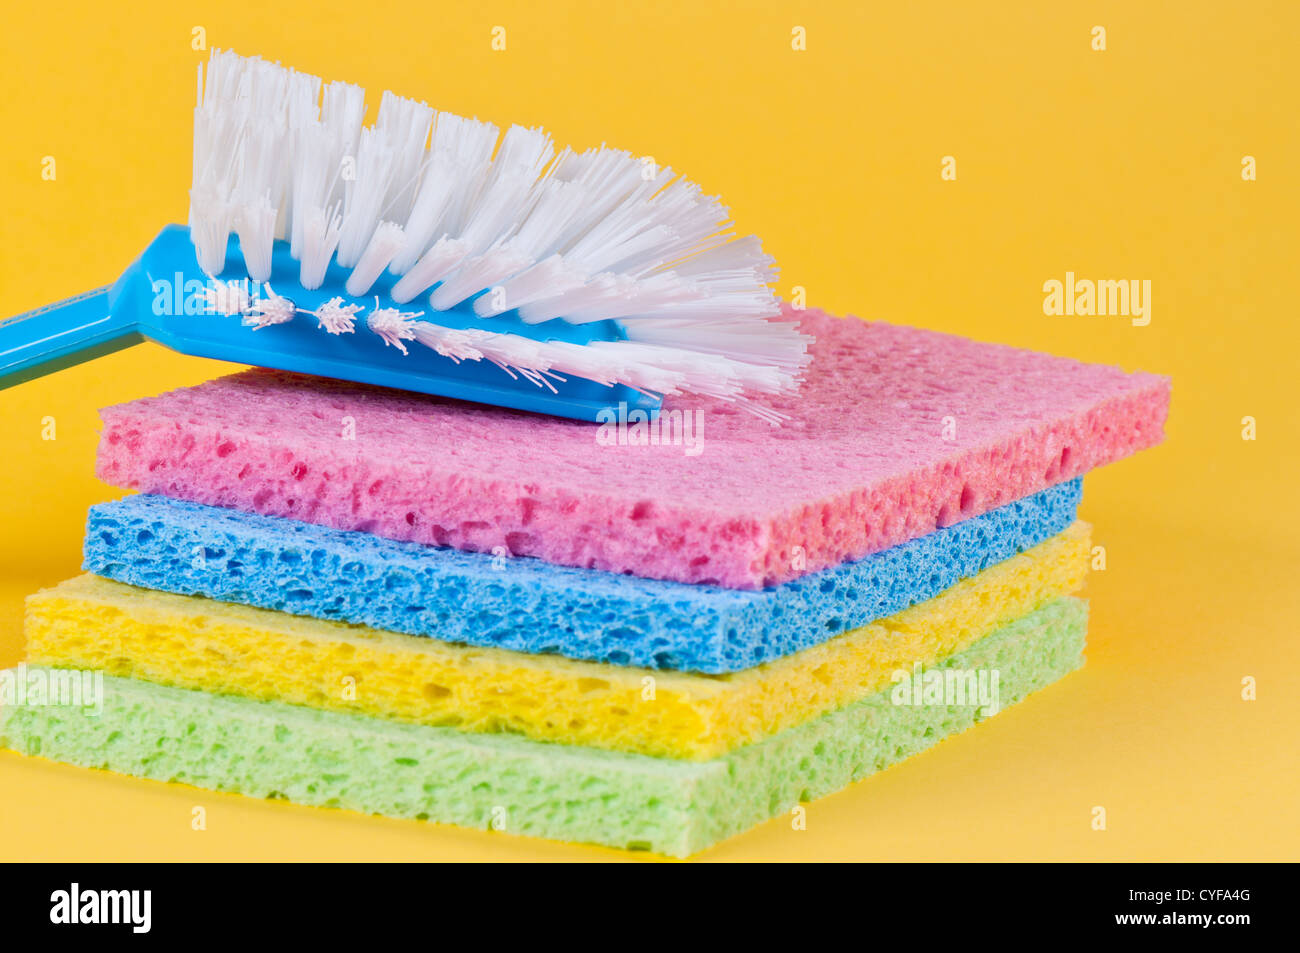 https://c8.alamy.com/comp/CYFA4G/kitchen-brush-and-multi-color-sponges-for-cleaning-CYFA4G.jpg